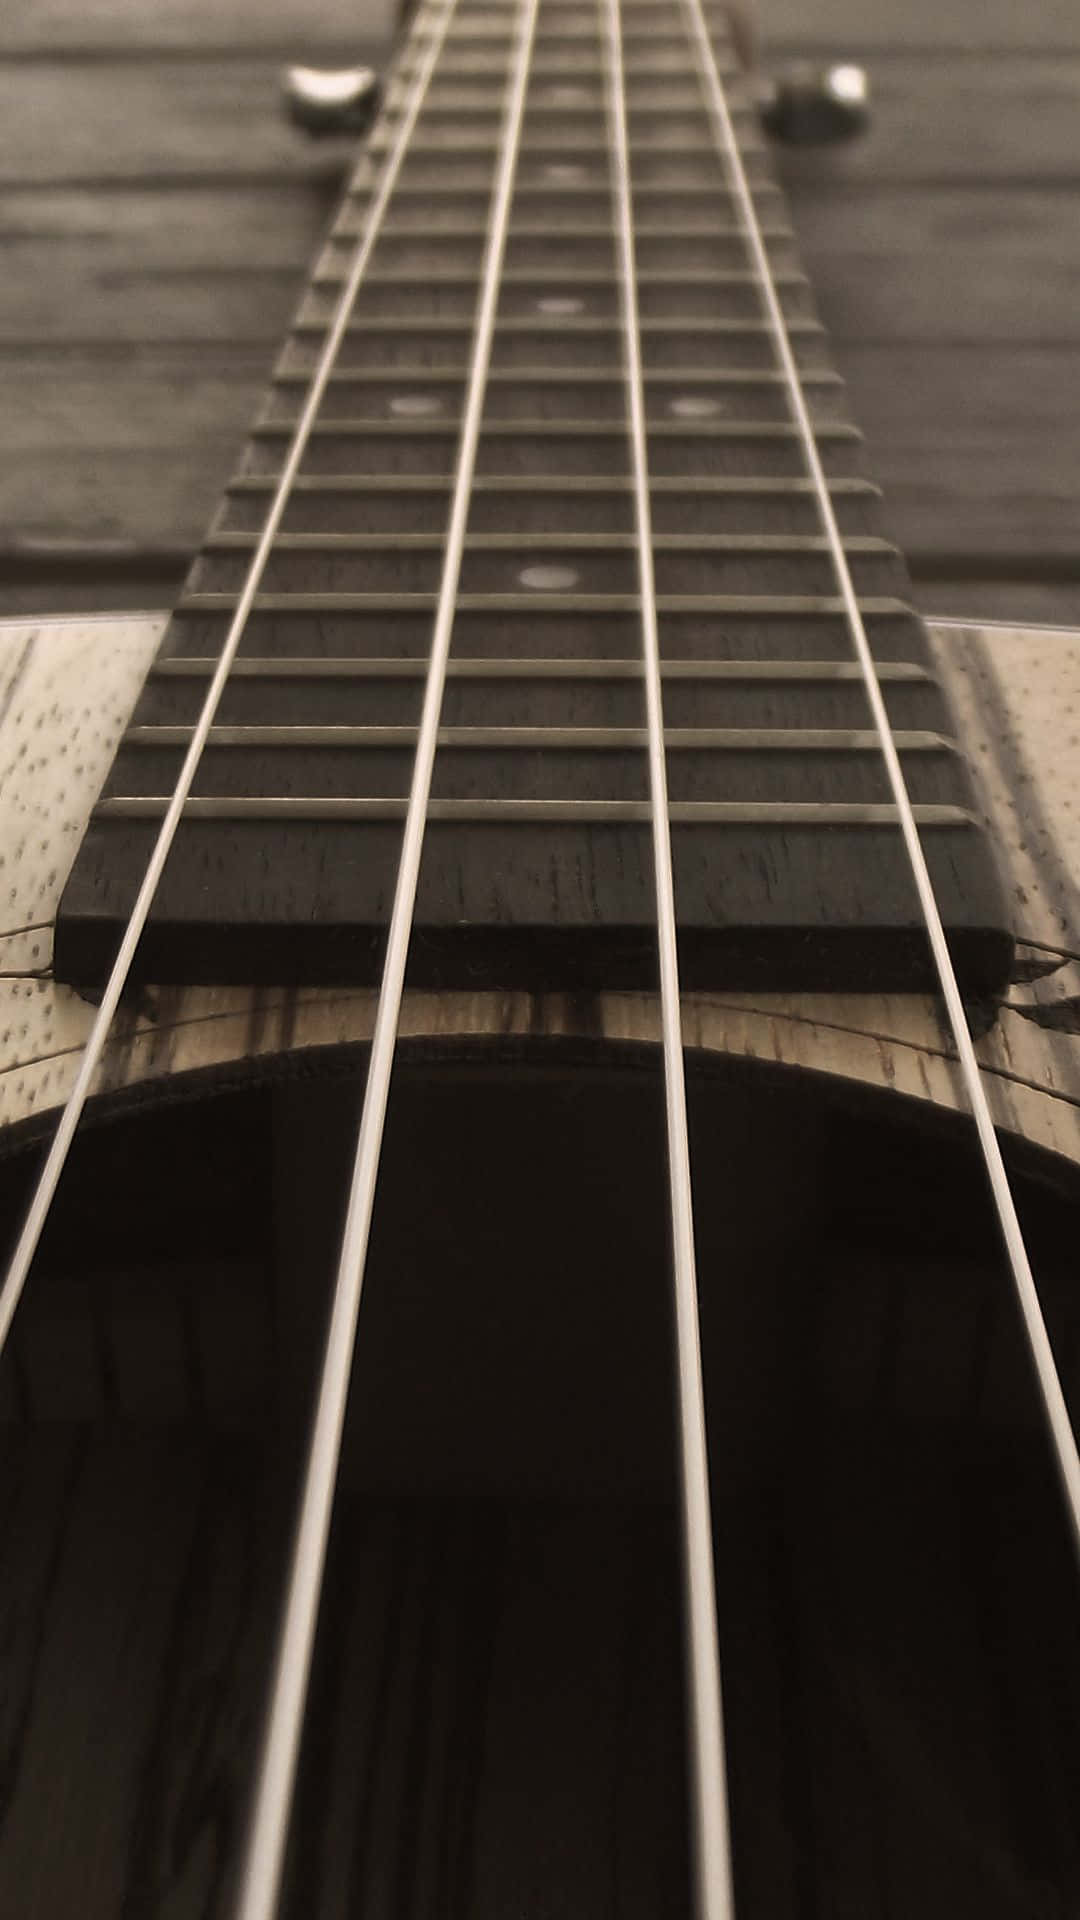 Acoustic Guitar Photos Download The BEST Free Acoustic Guitar Stock Photos   HD Images